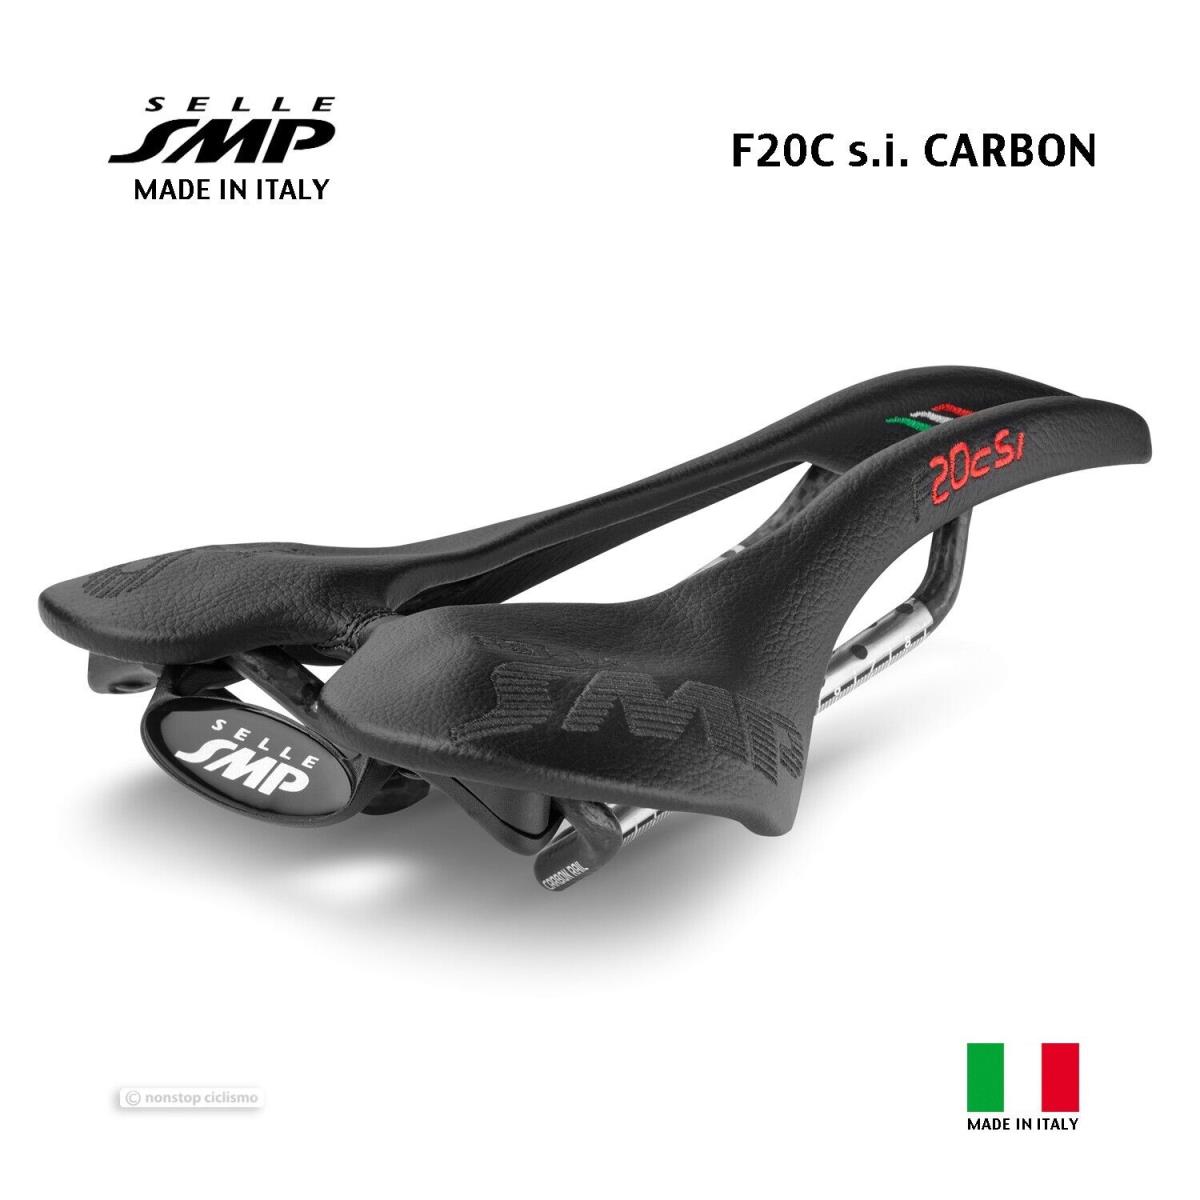 Selle Smp F20Csi Carbon Saddle : Black - Made IN Italy